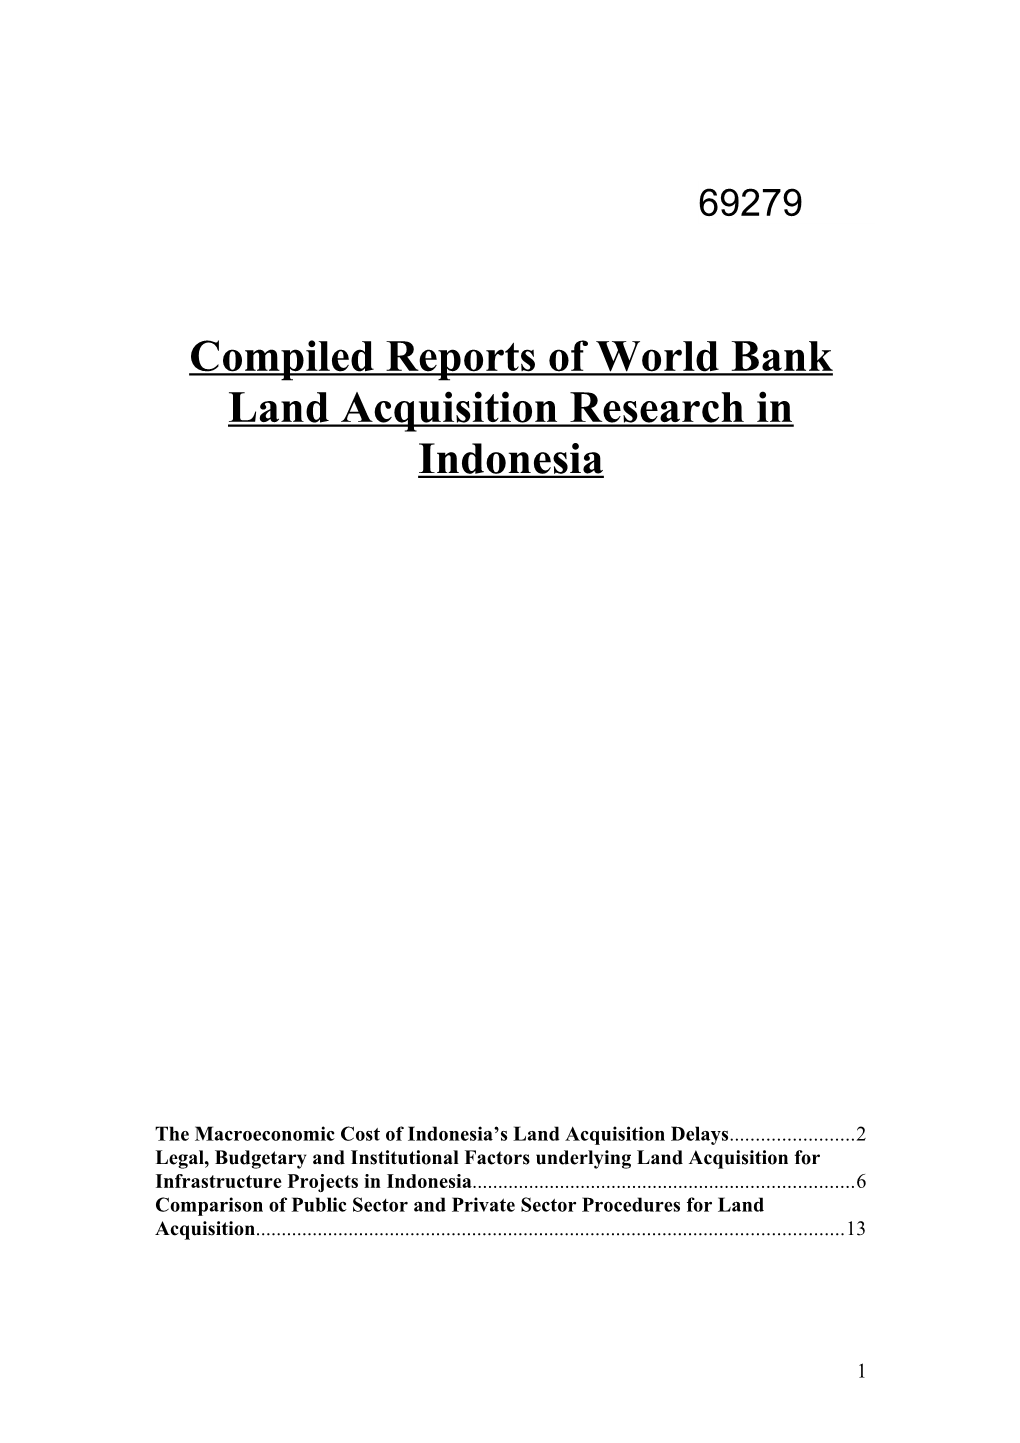 Compiled Draft Reports of World Bank Land Acquisition Research in Indonesia